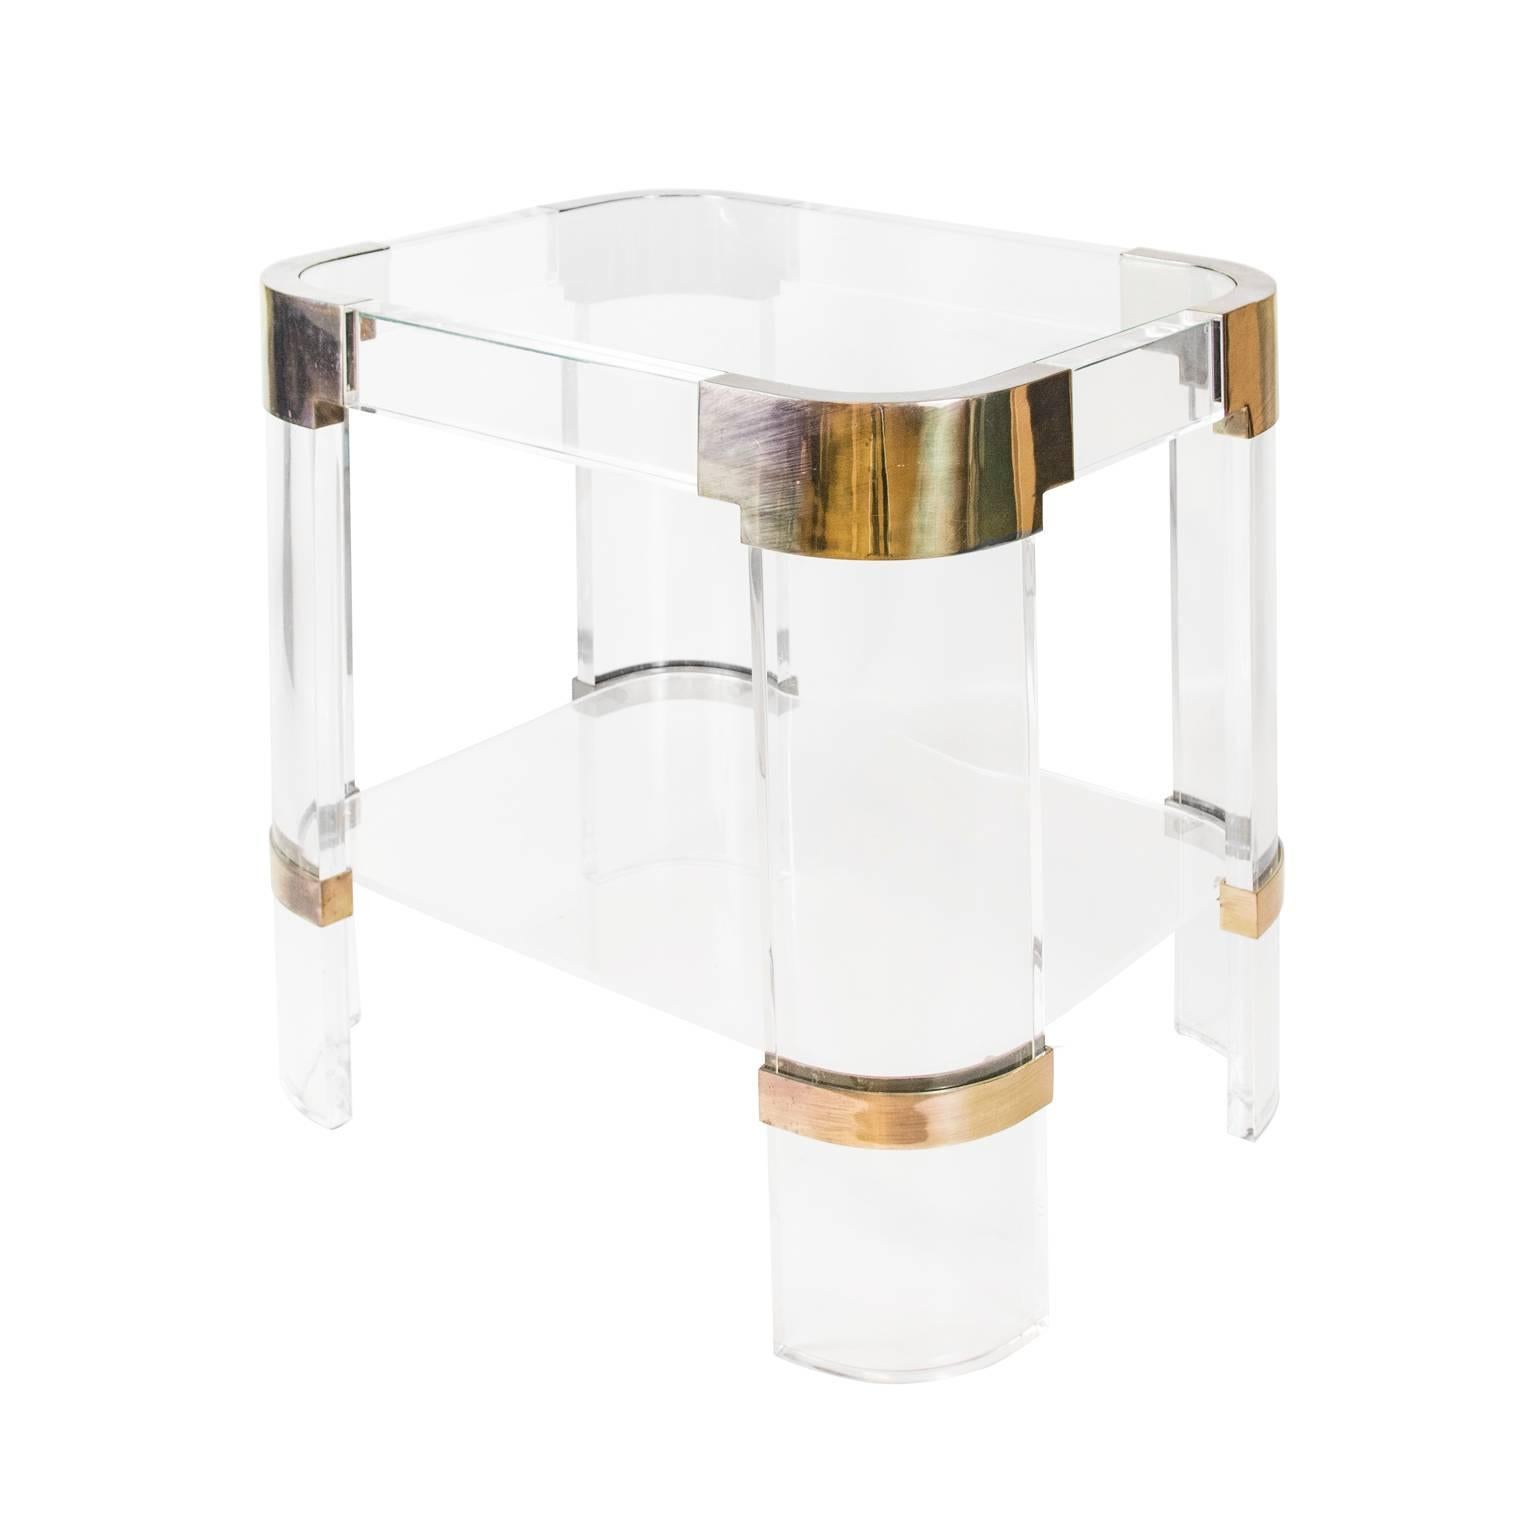 In Lucite with nickel accents, from Charles Hollis Jones' 